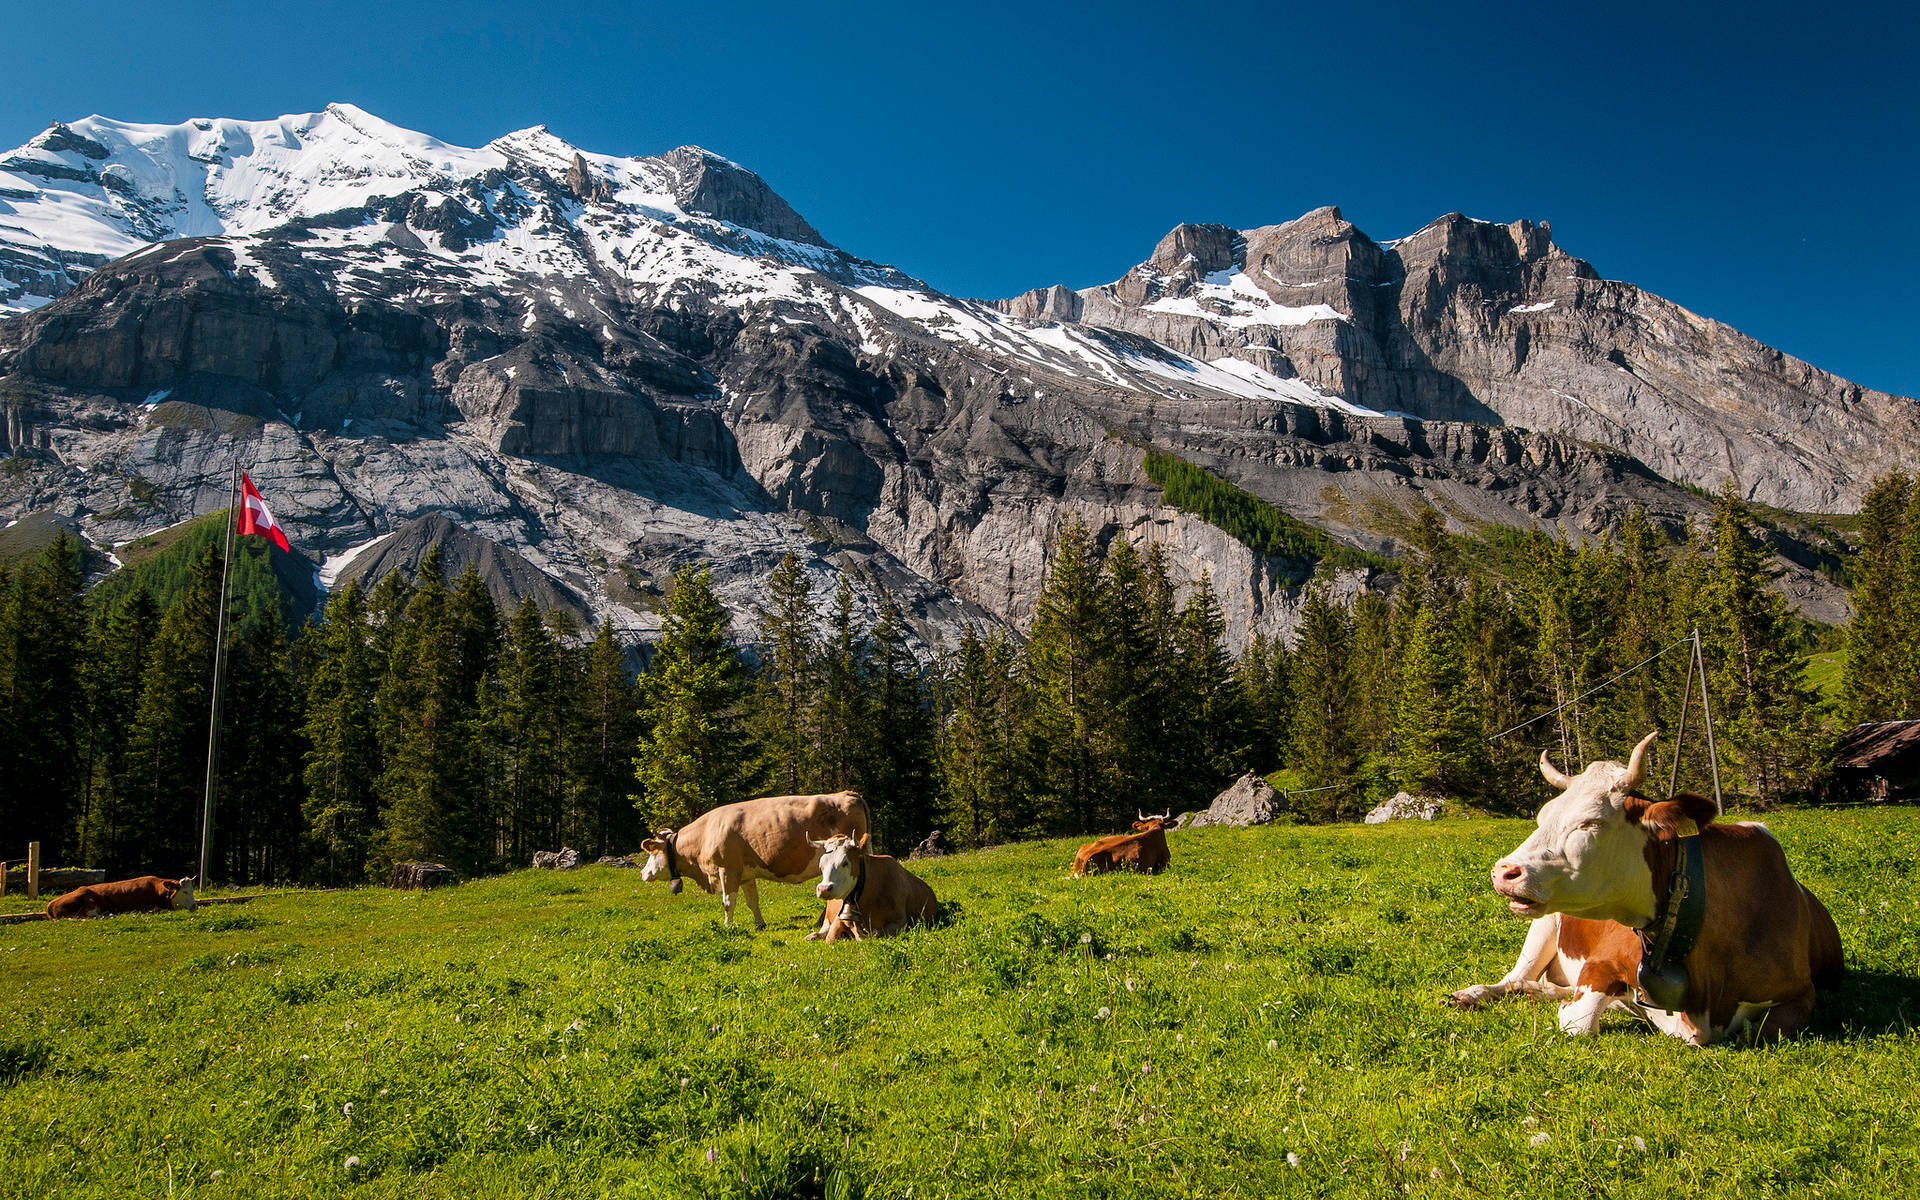 Cute Cows With Amazing Mountain View Wallpaper